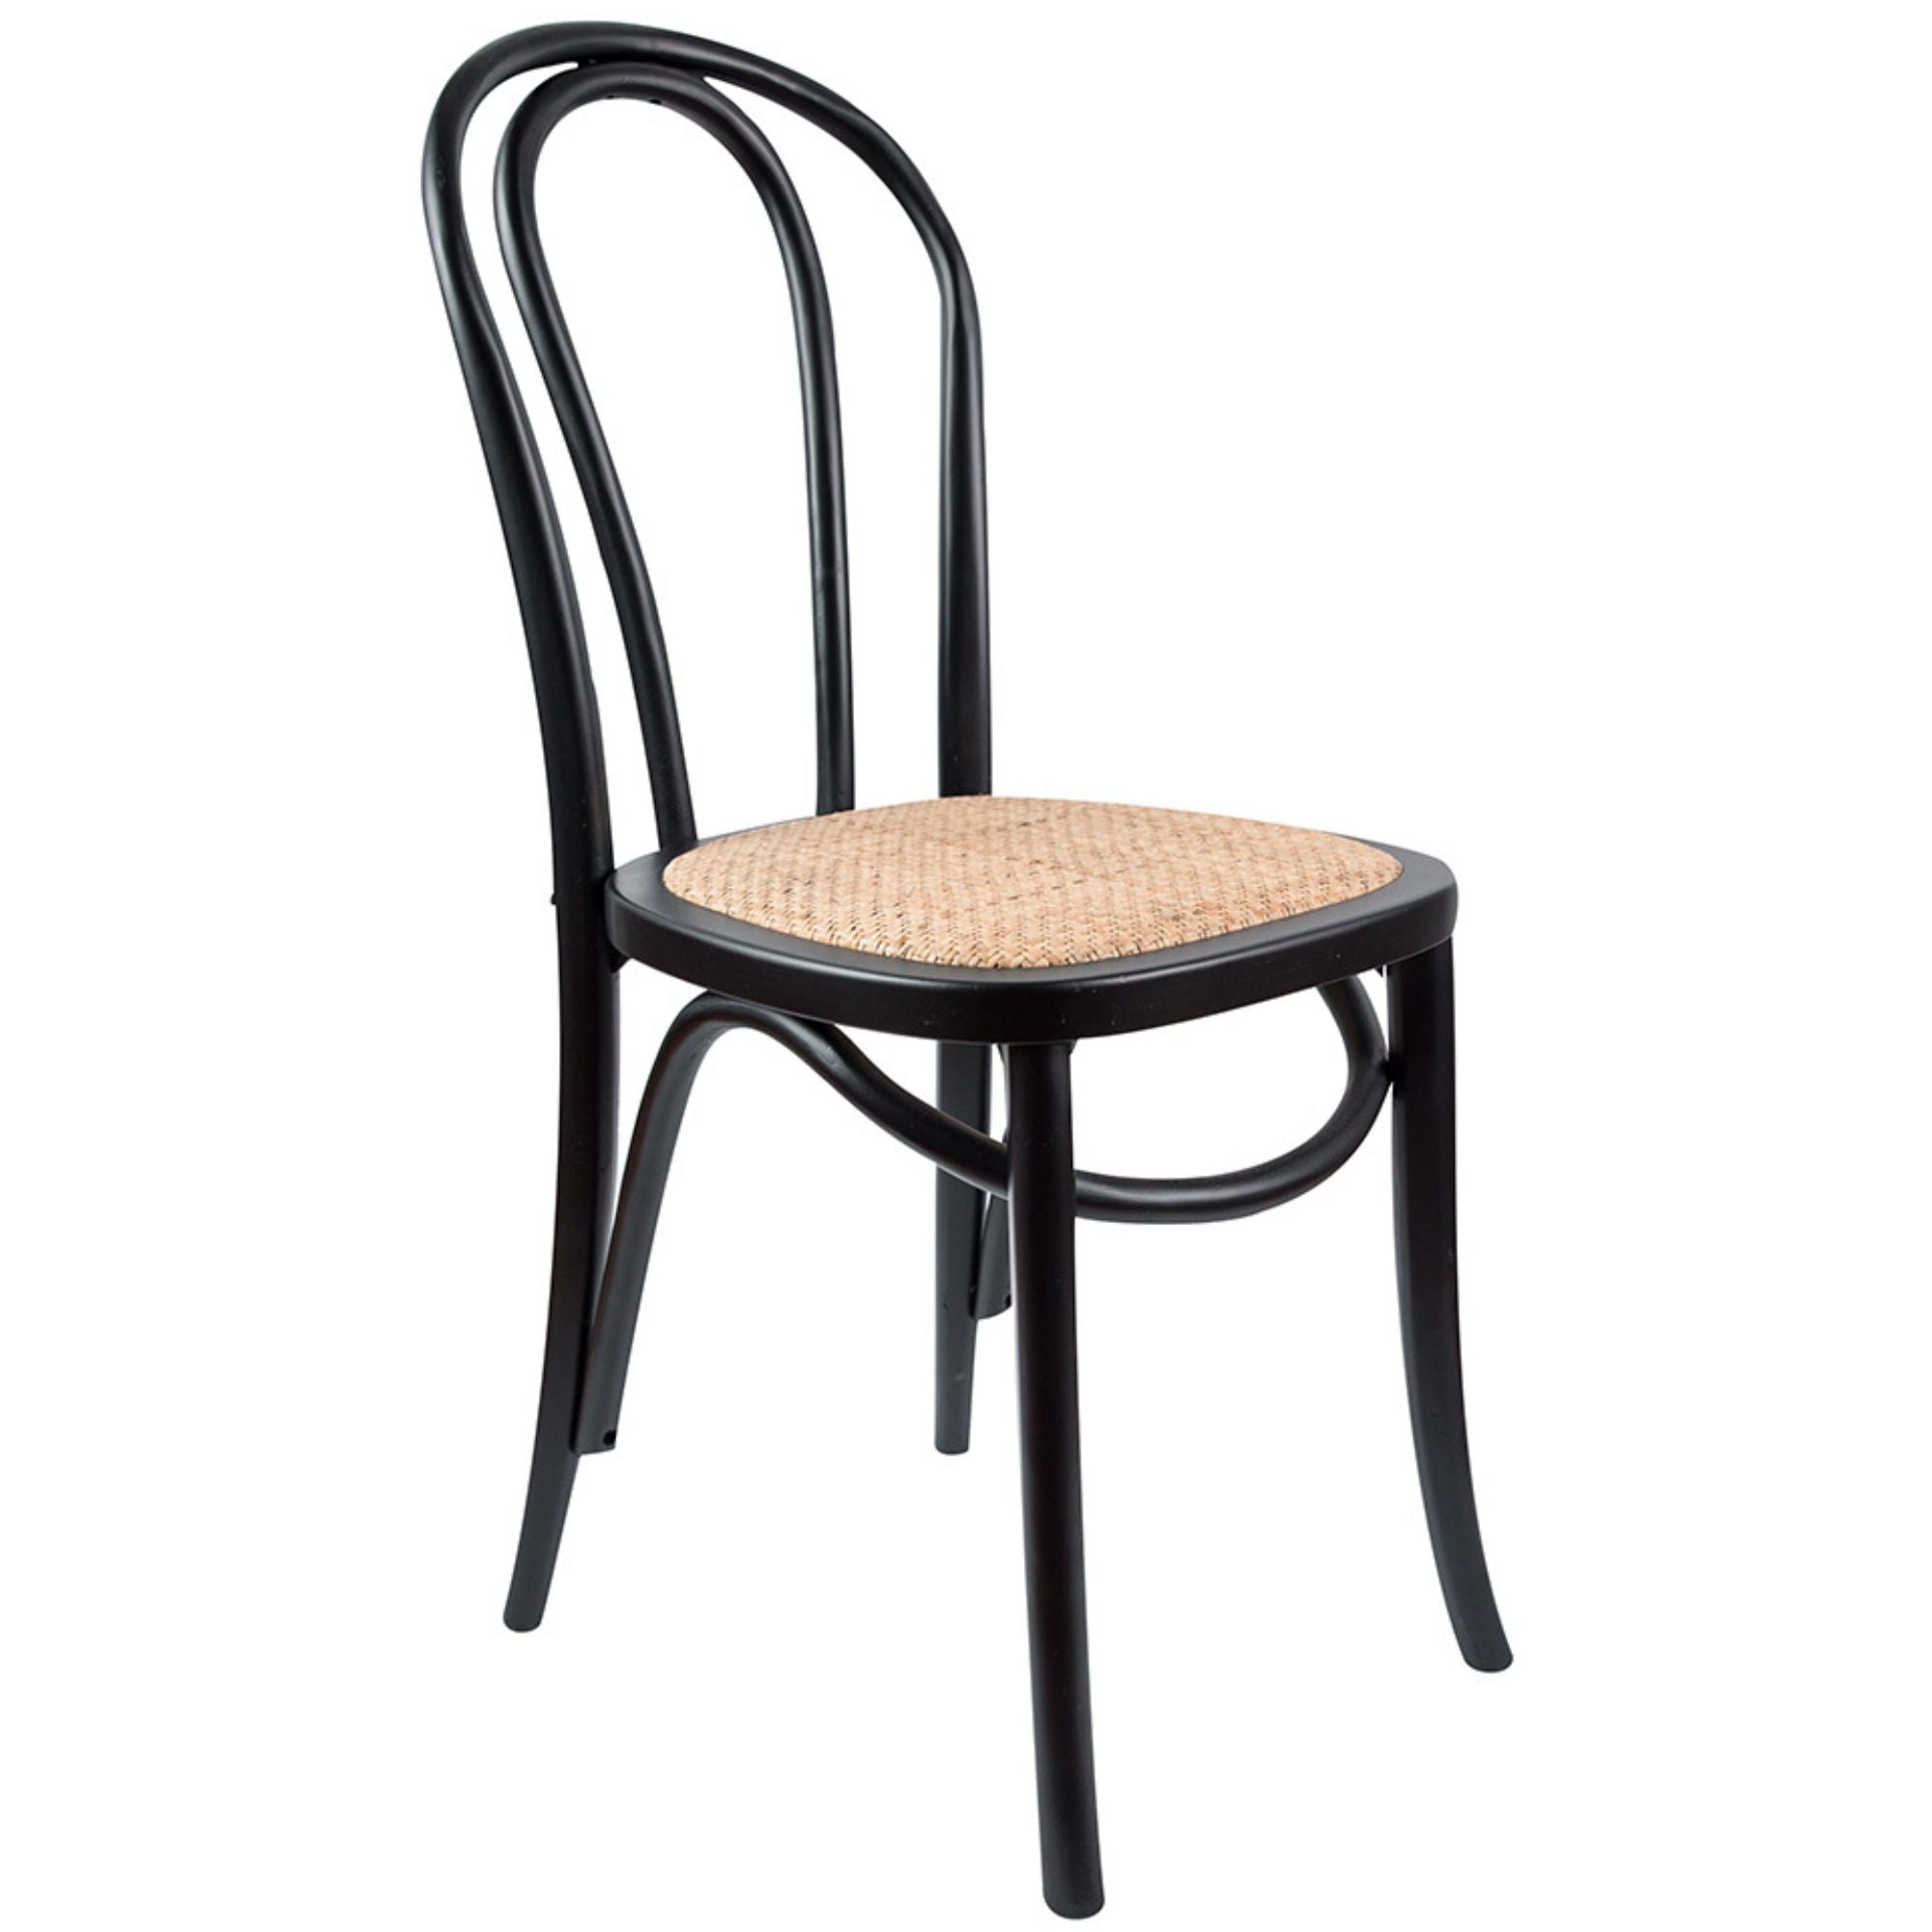 Back Dining Chair 4 Set Solid Elm Timber Wood Rattan Seat - Black